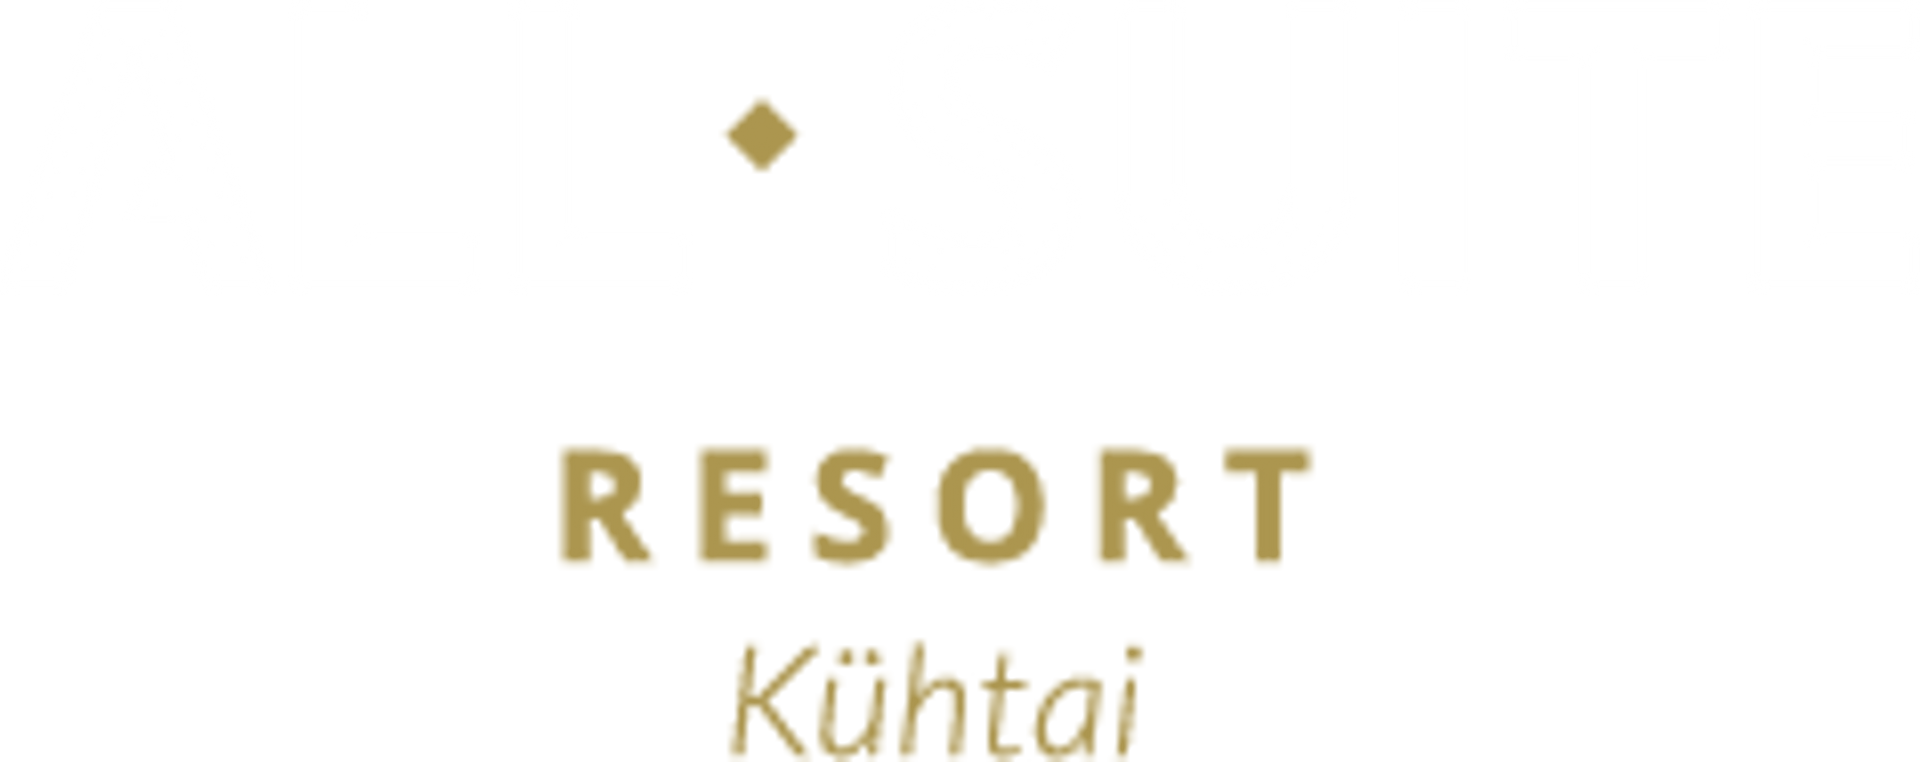 ALL-SUITE RESORTS